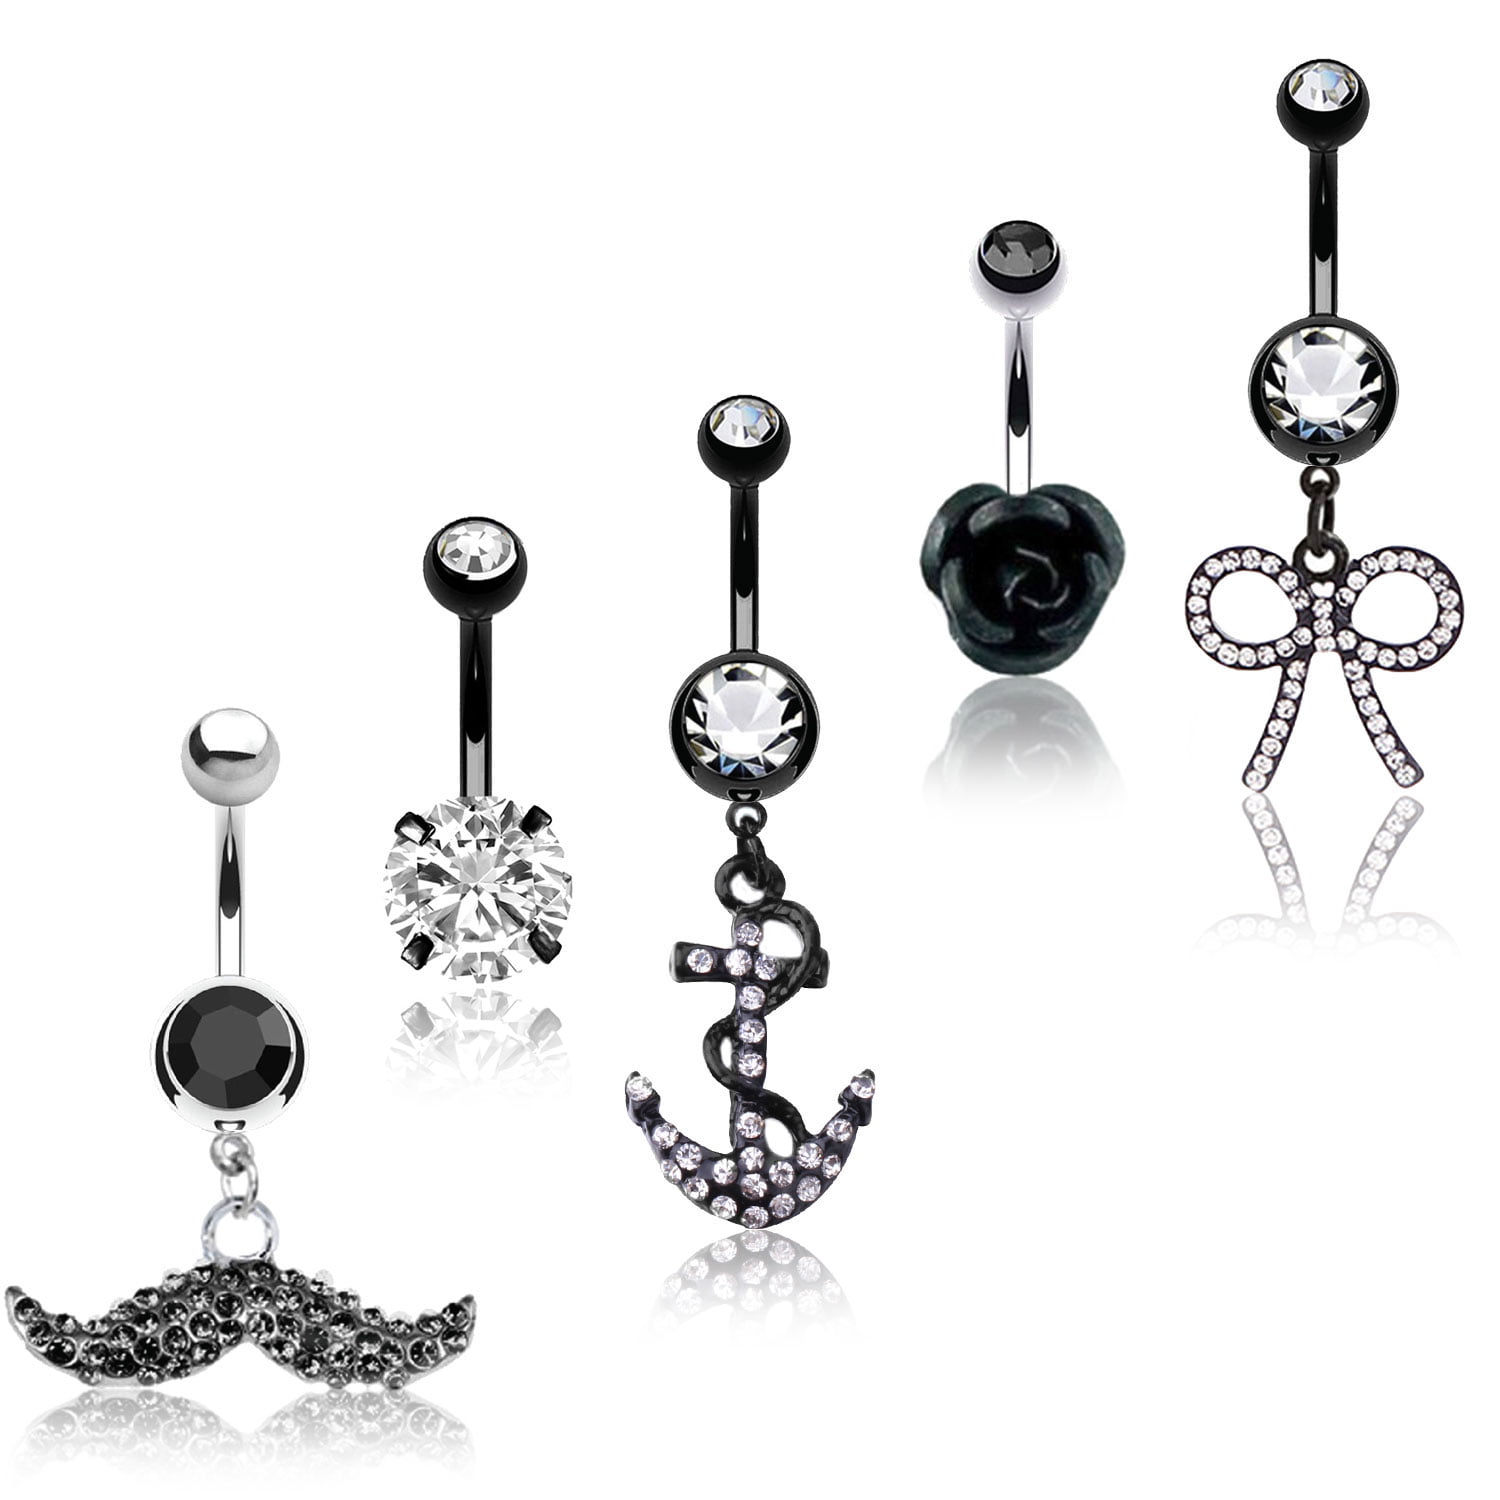 Details about   Beauty Navel Belly Button Rings Bar Crystal Flower Dangle Body Piercing Jewelry